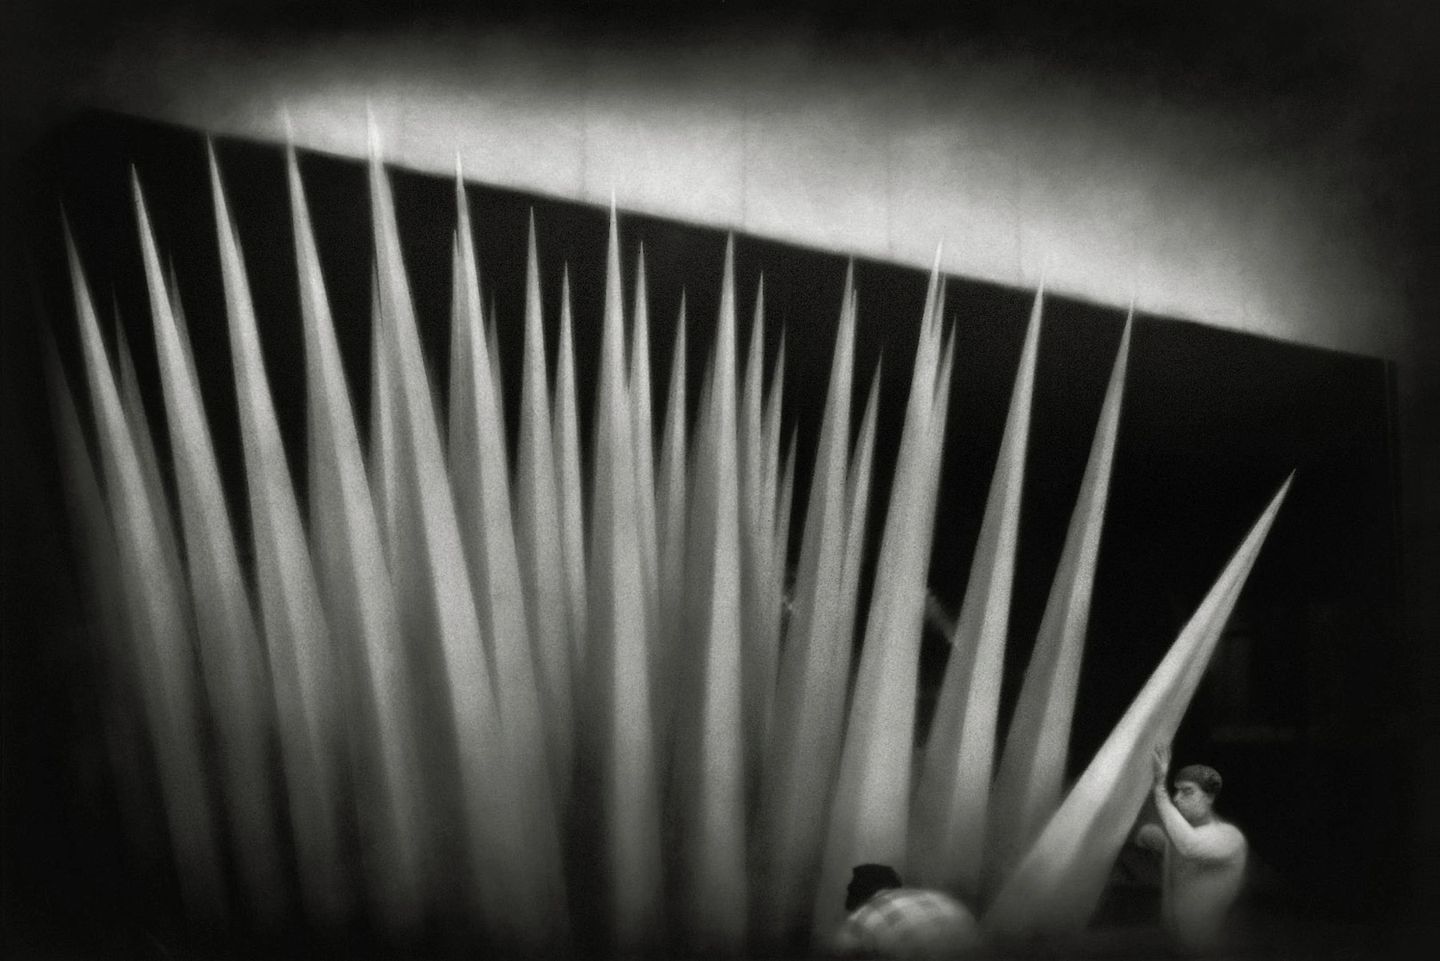 A black and white photo of some long needles.